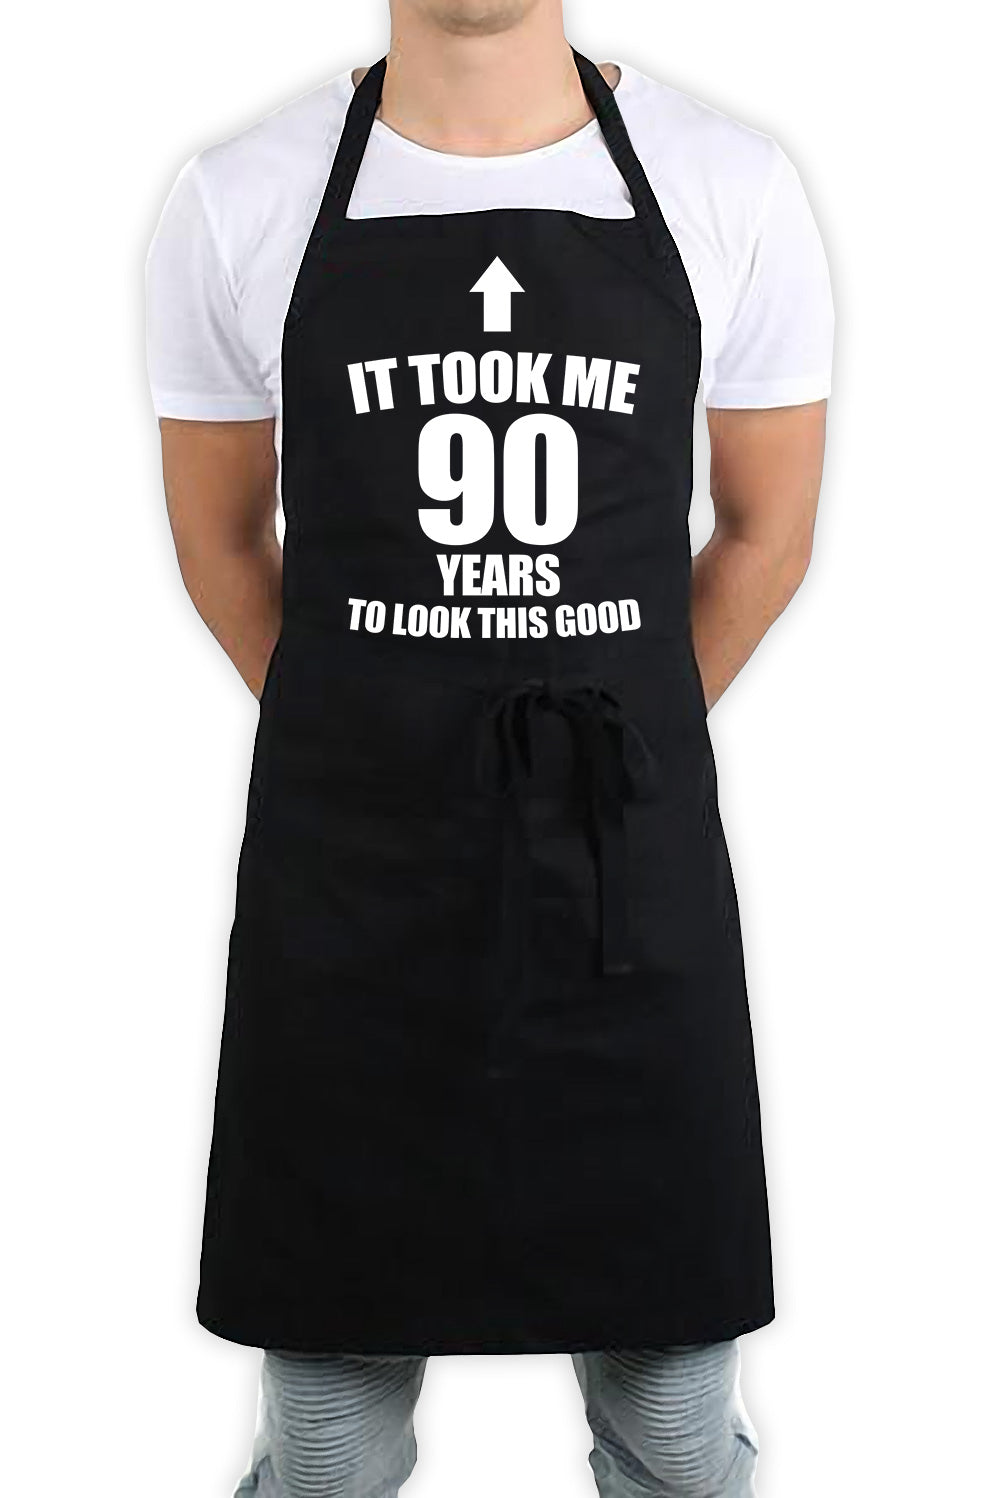 It Took Me 90 Years To Look This Good Funny Kitchen BBQ Apron Black